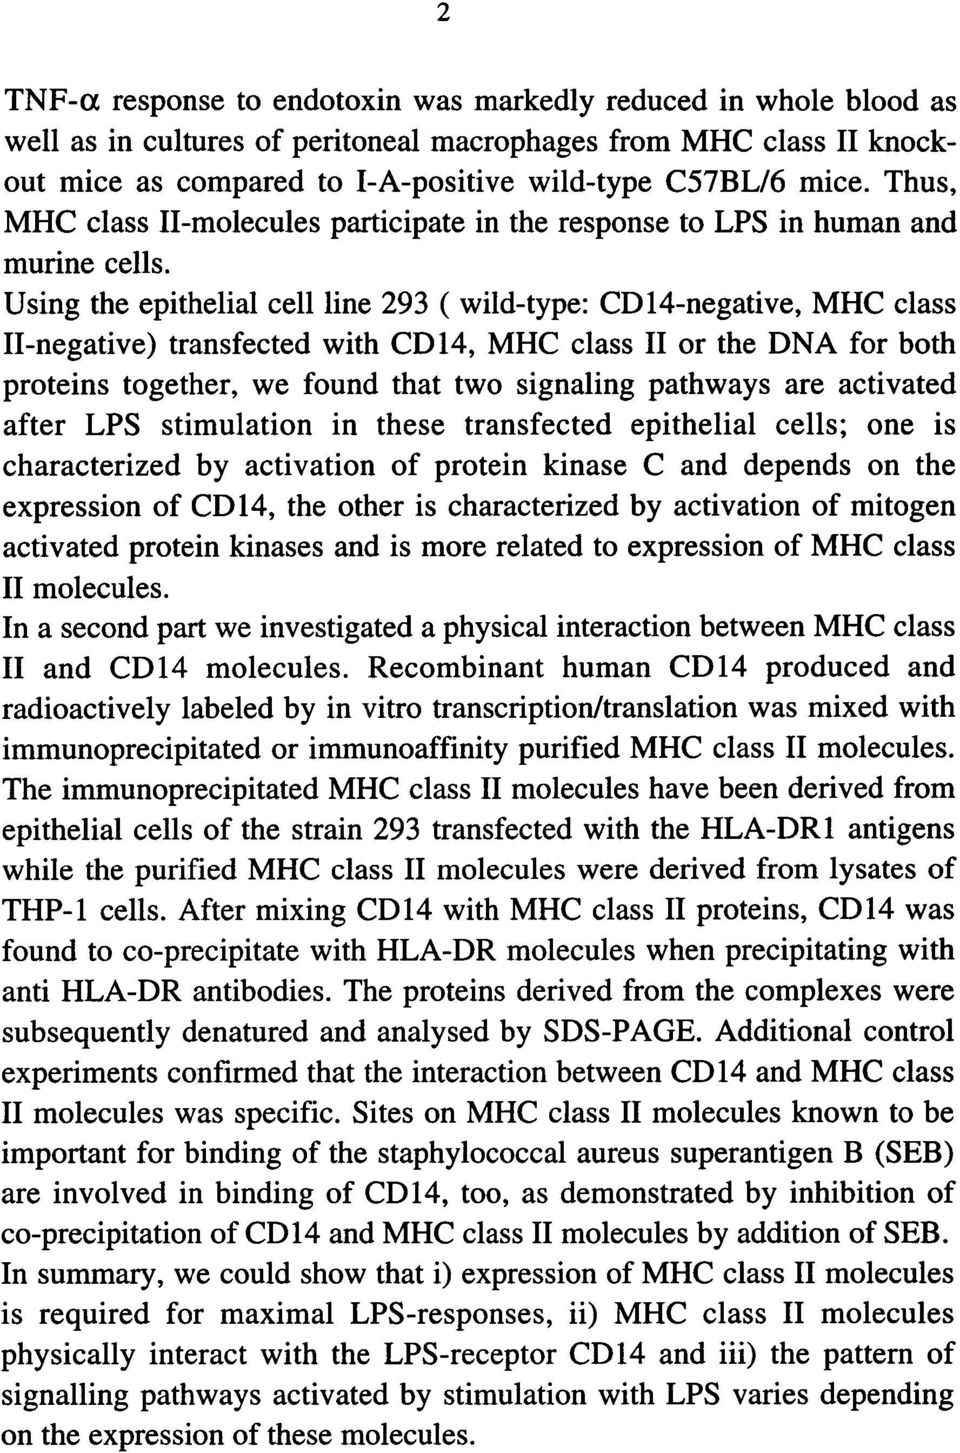 Using the epithelial cell line 293 ( wild-type: CD14-negative, MHC class II-negative) transfected with CD 14, MHC class II proteins together, we found that two signaling pathways or the DNA for both